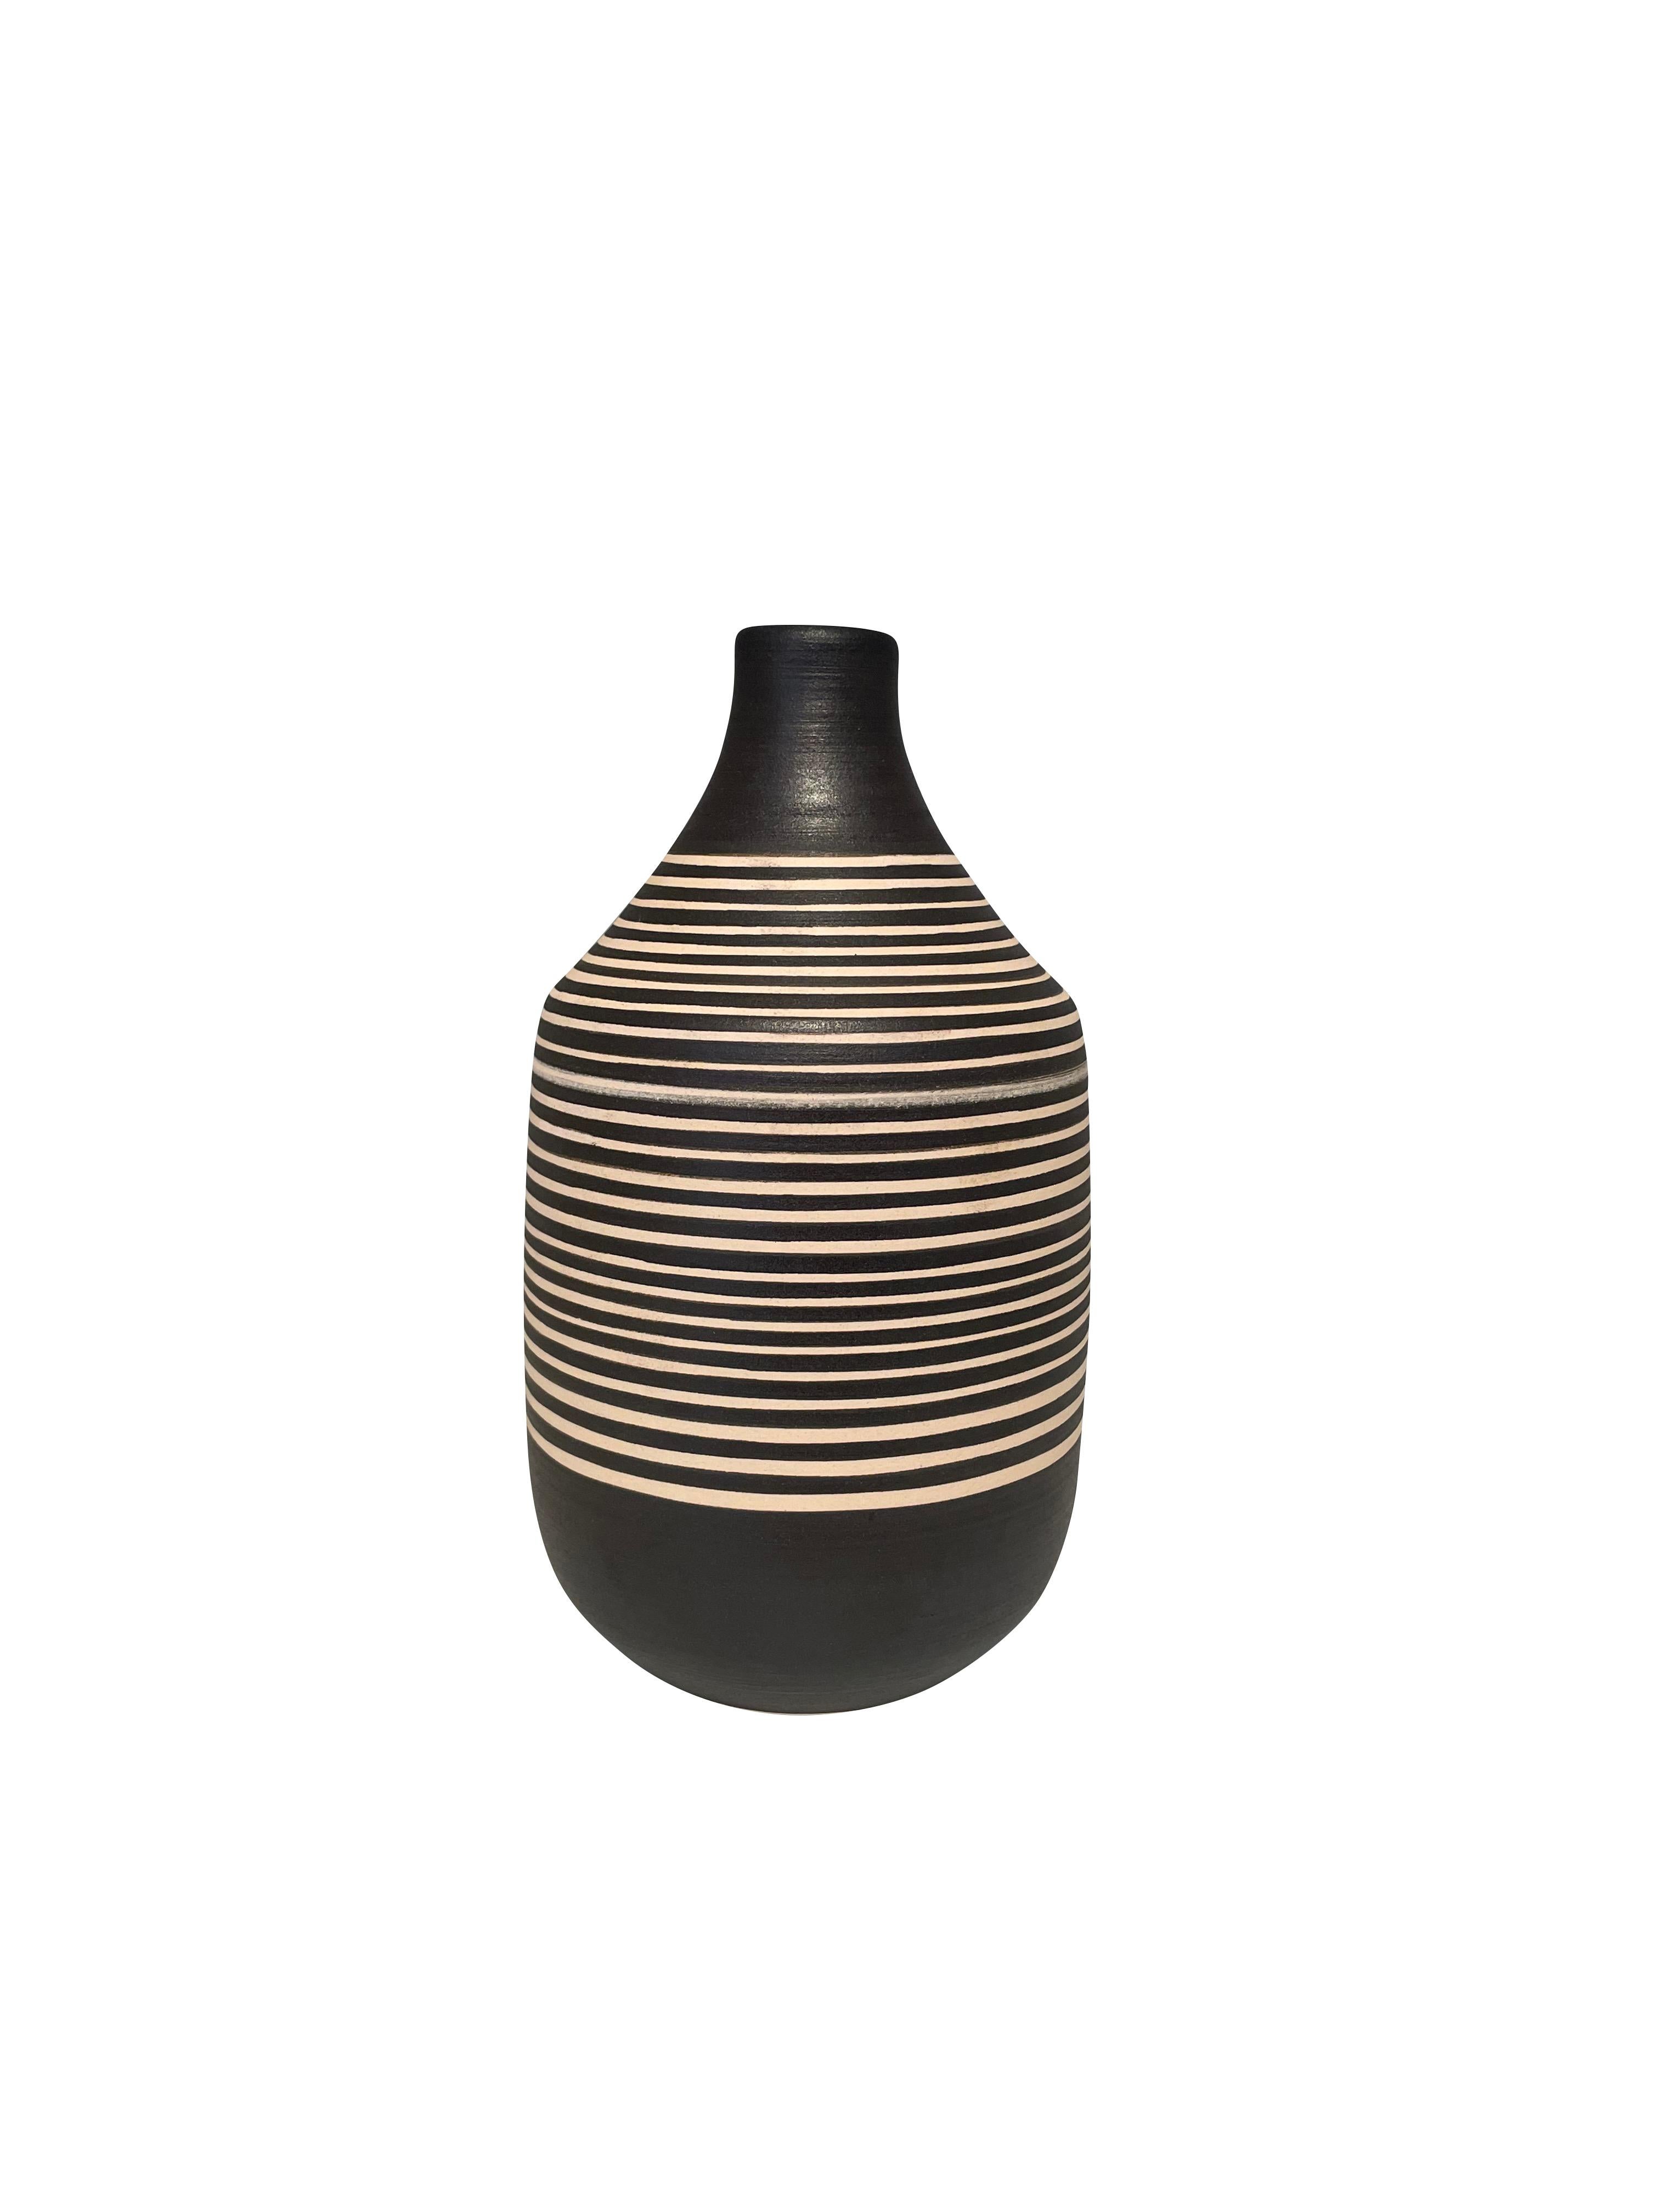 Contemporary Turkish hand made black & cream thin horizontal striped vase.
Wide opening.
Can hold water.
Two available.
Part of a large collection.